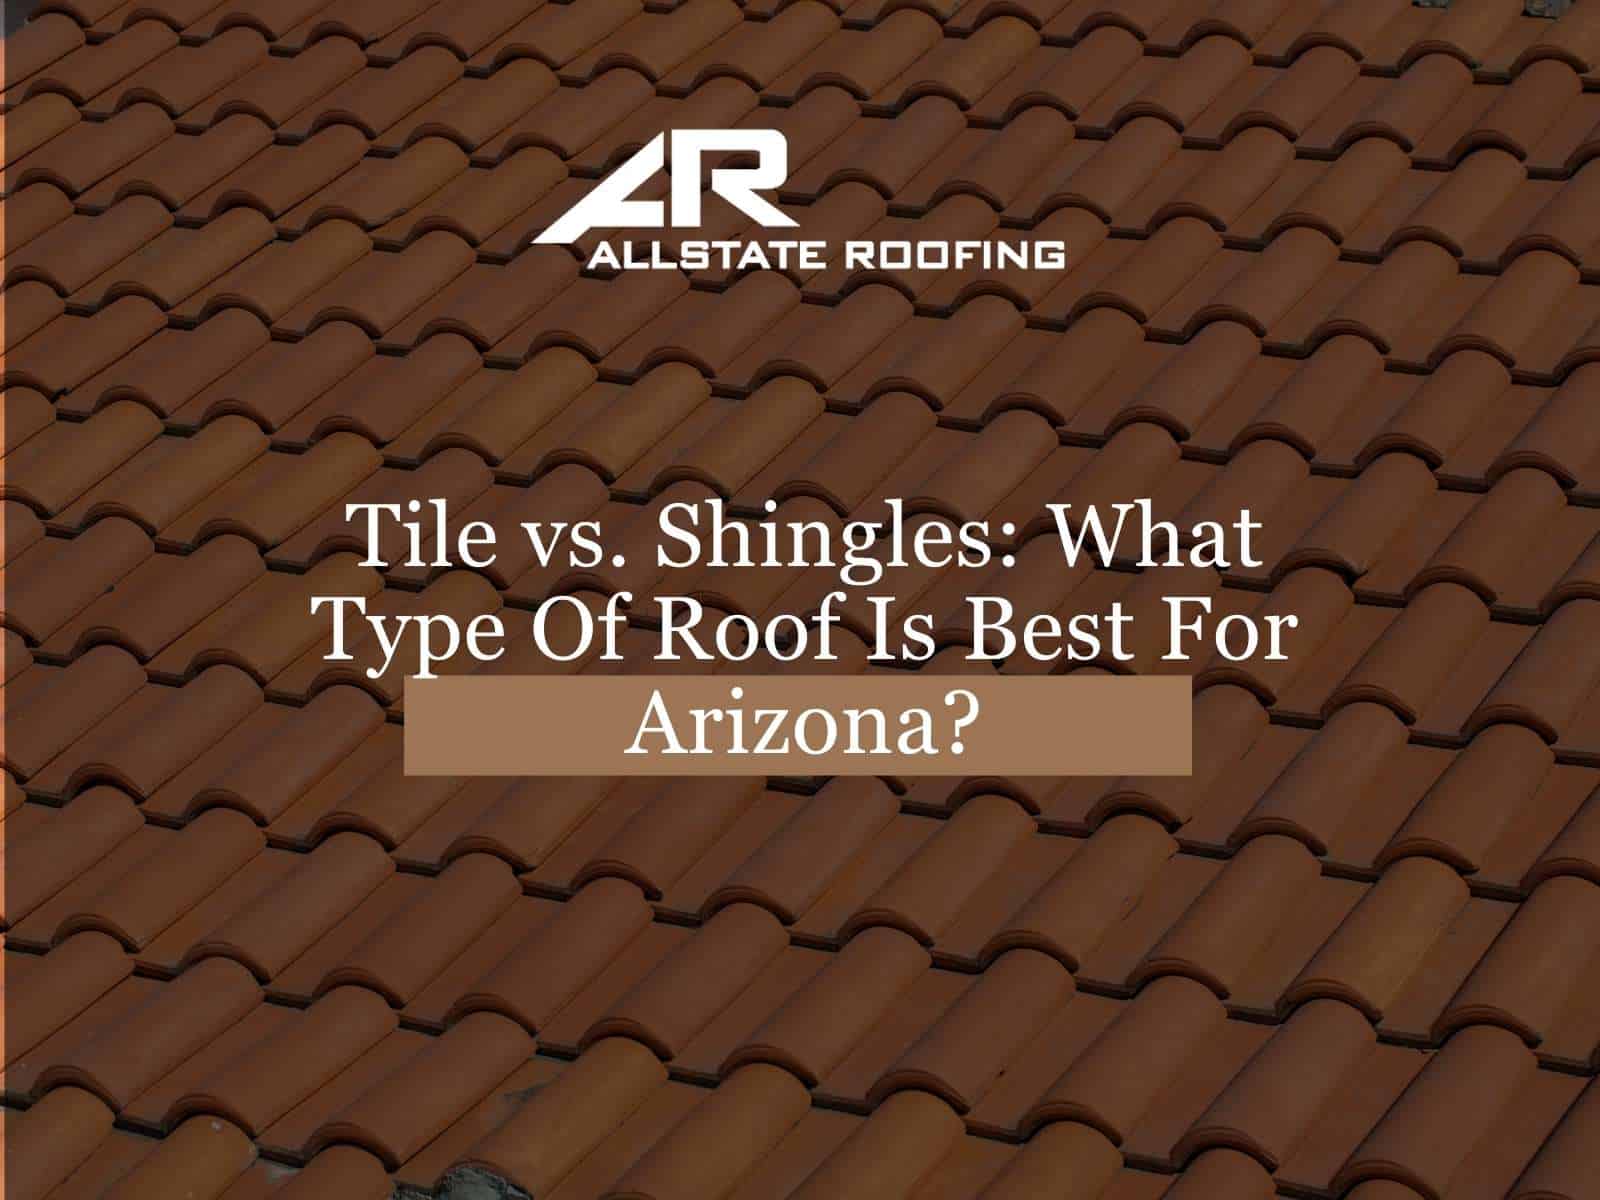 Phoenix Tile Roof Services By Allstate, Best Underlayment For Tile Roof In Arizona